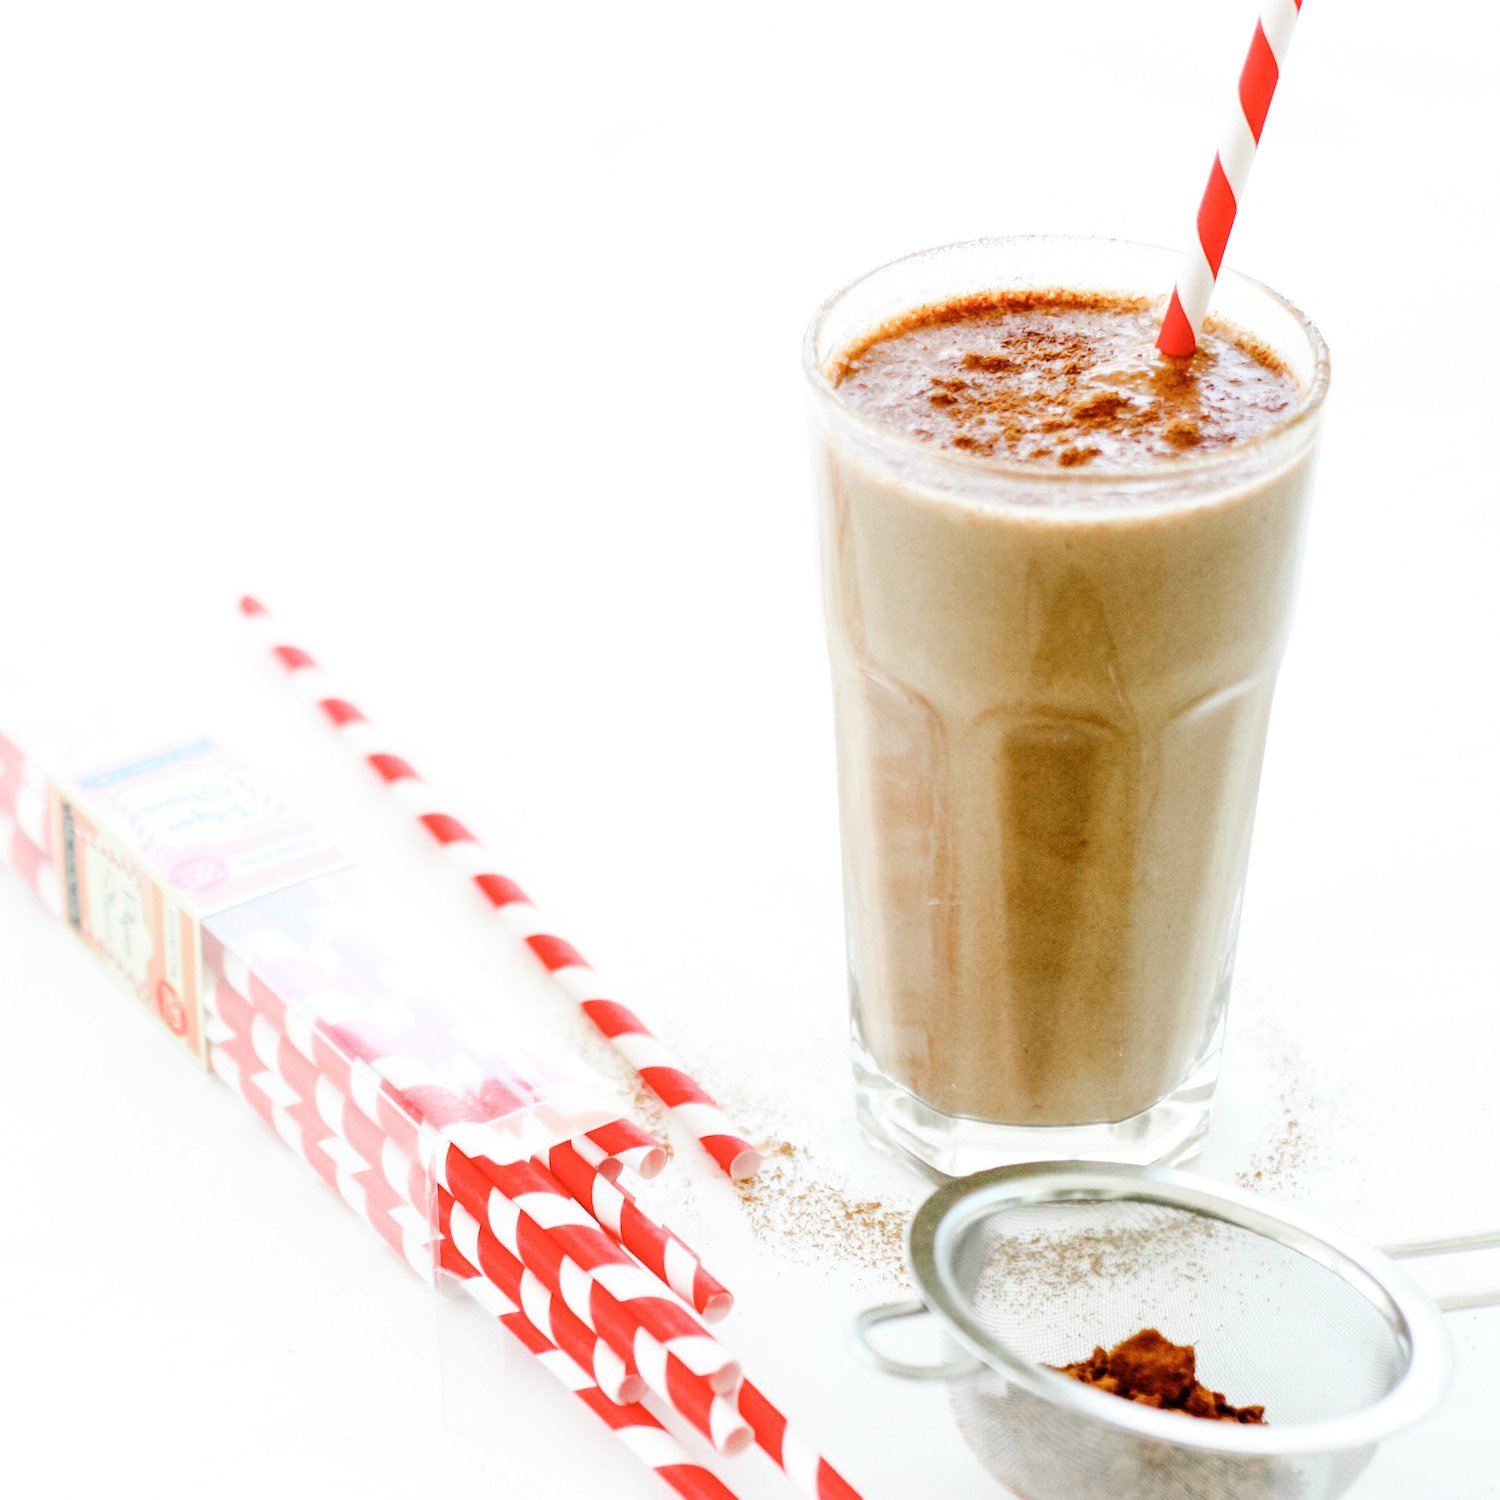 Healthy Chocolate and Peanut Butter Shake